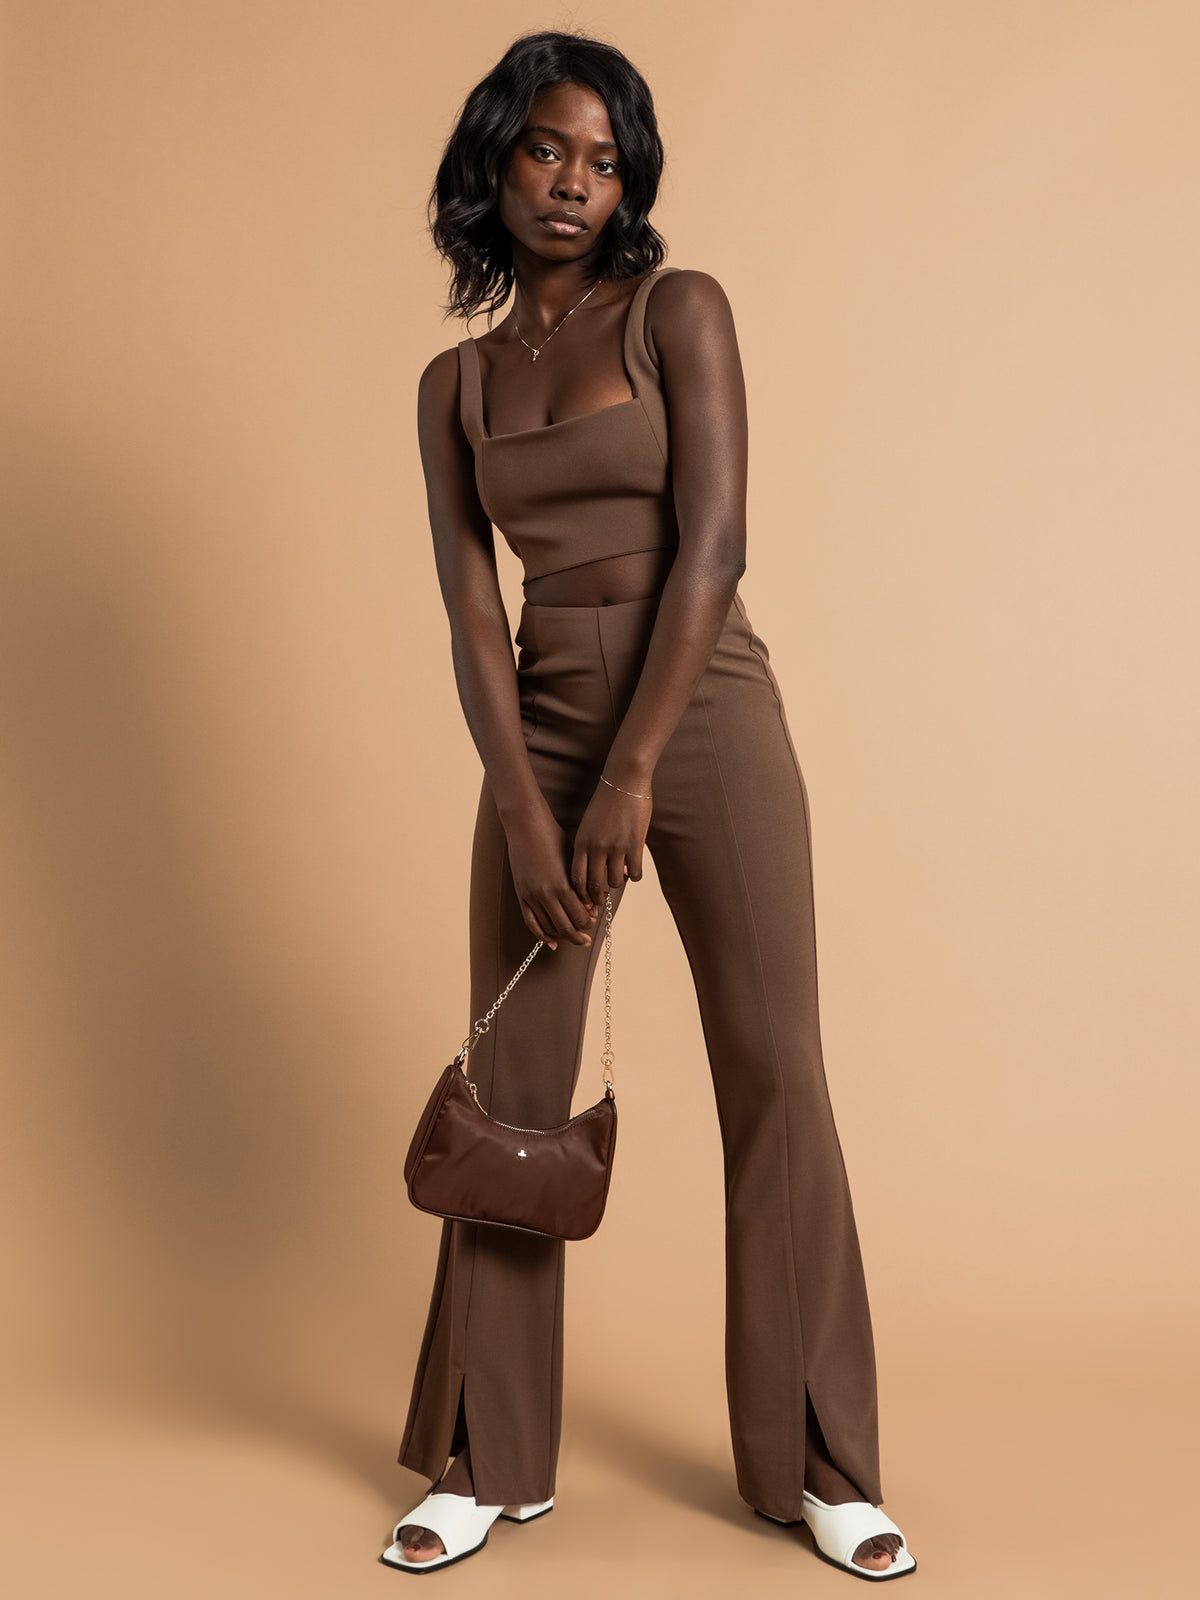 Niclette Bonded Top in Chocolate